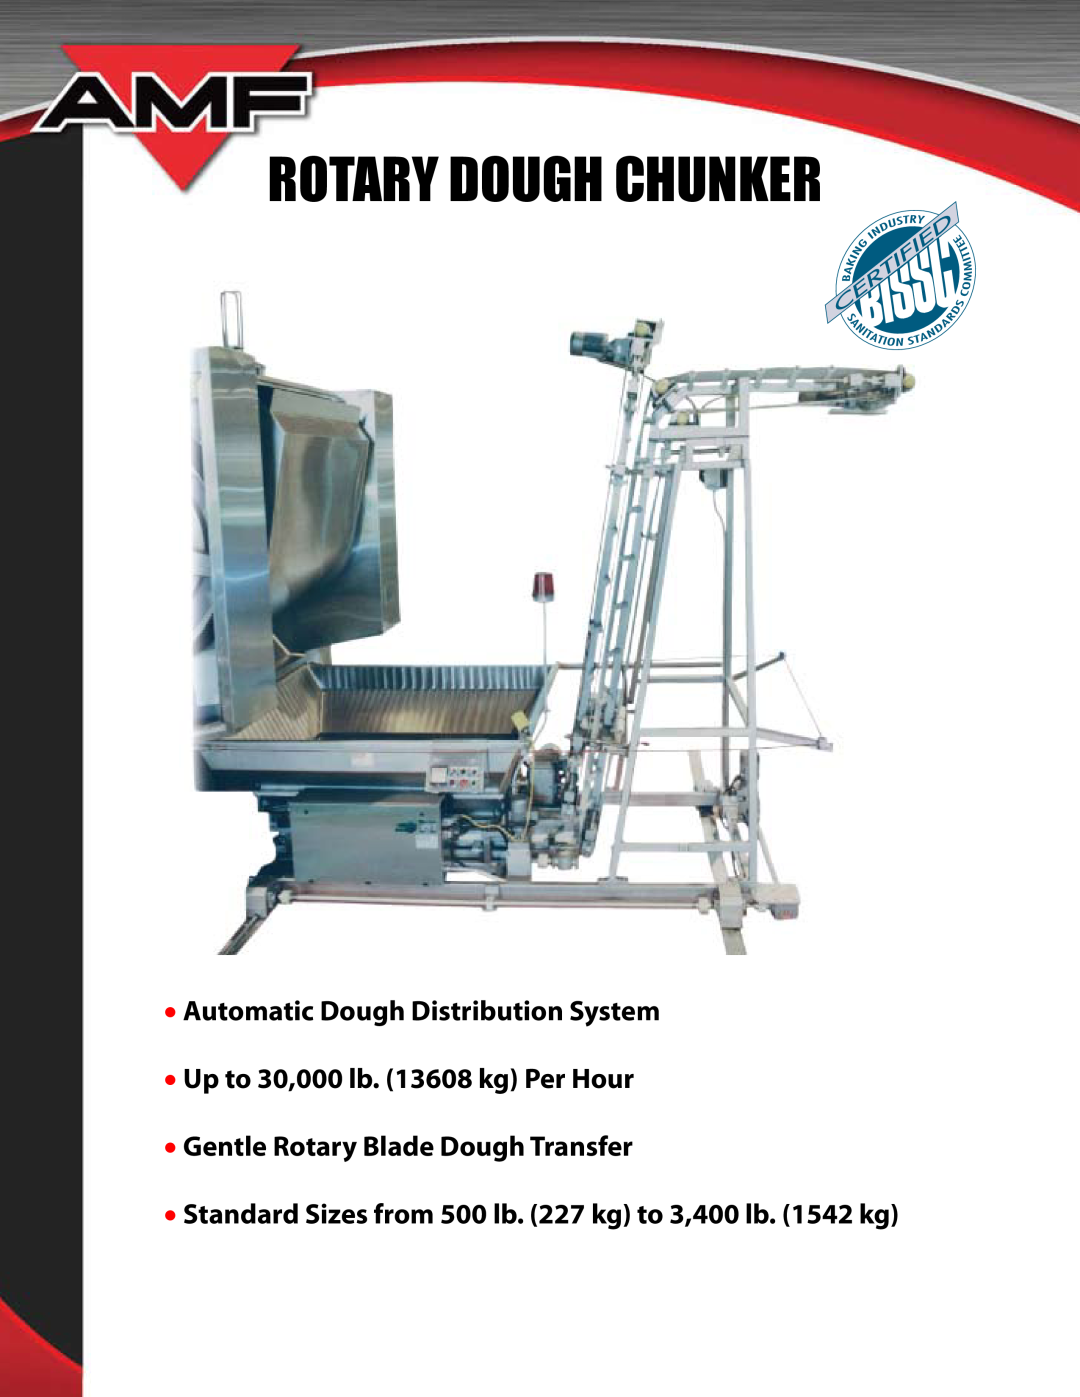 AMF RDC-18 -500 manual Rotary Dough Chunker, Automatic Dough Distribution System, Up to 30,000 lb. 13608 kg Per Hour 